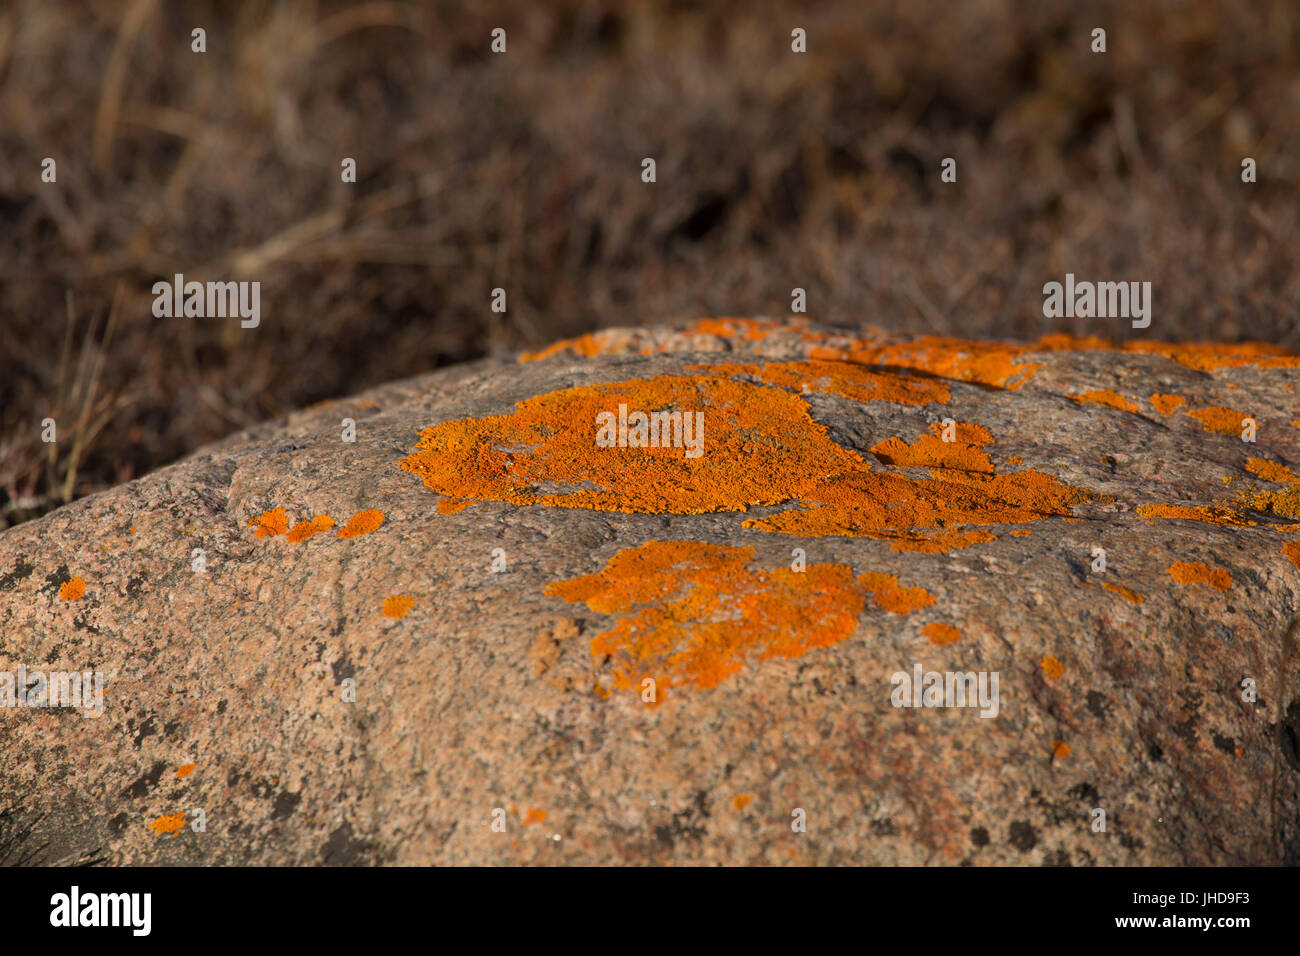 Litchen on a stone in the sub-arctic, in Manitoba, Canada. The rock has been deposited during last Ice Age. Stock Photo